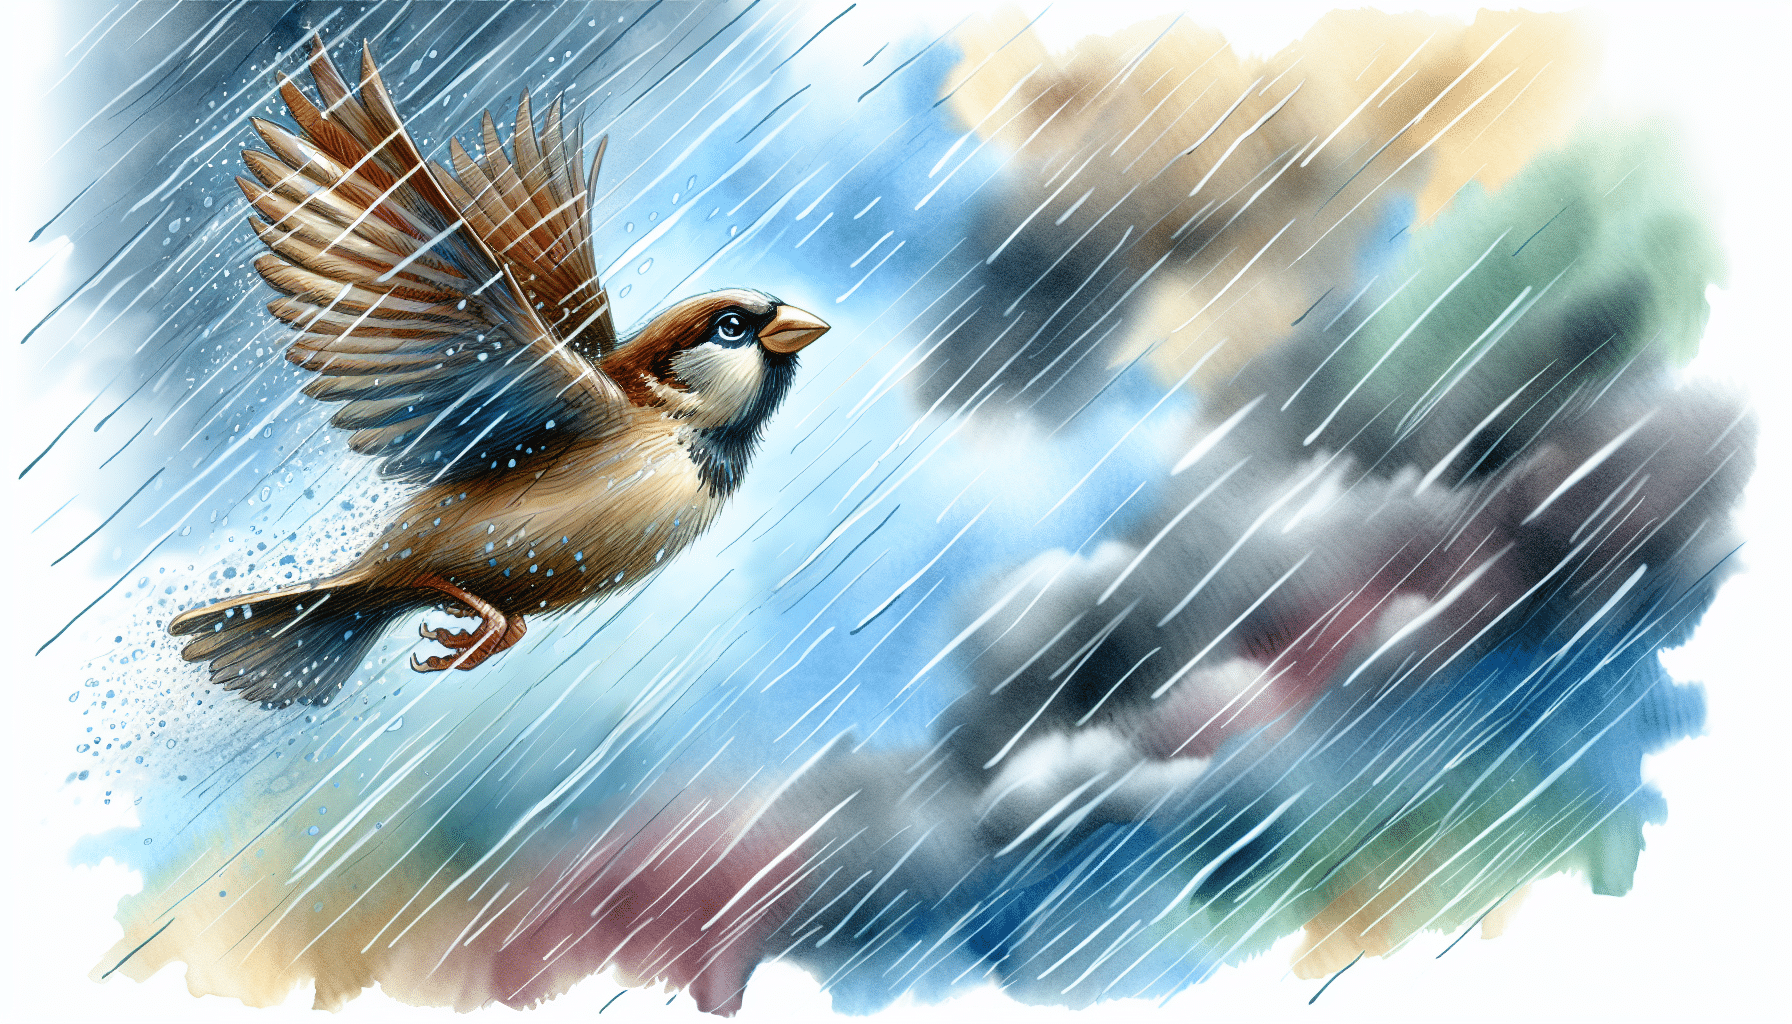 The Courageous Sparrow Flying Against the Storm